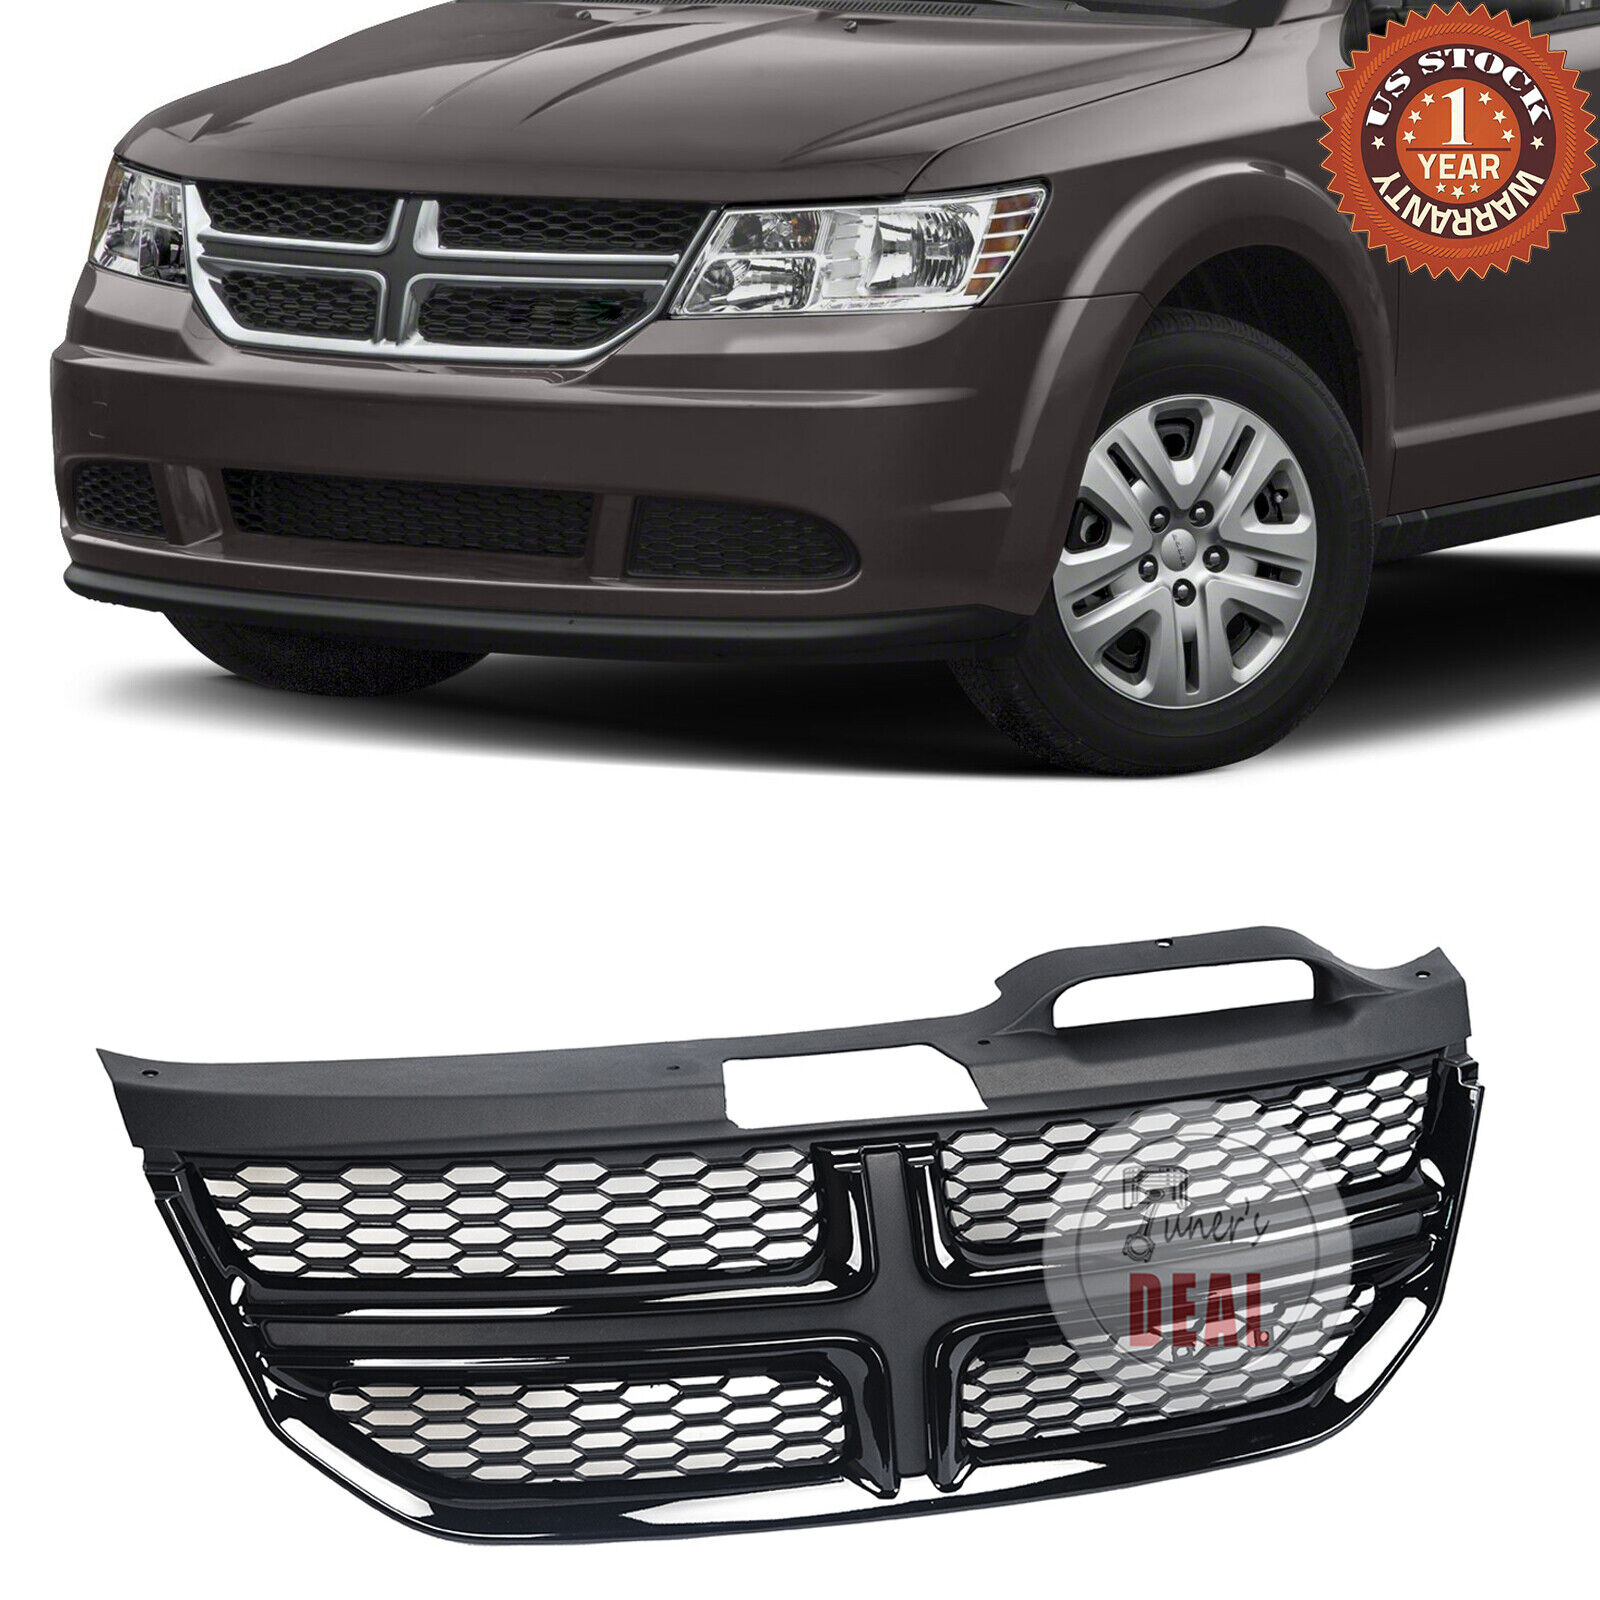 Front Grille Gloss Black For 2013-2020 Dodge Journey 5NB56TZZAB OE Style